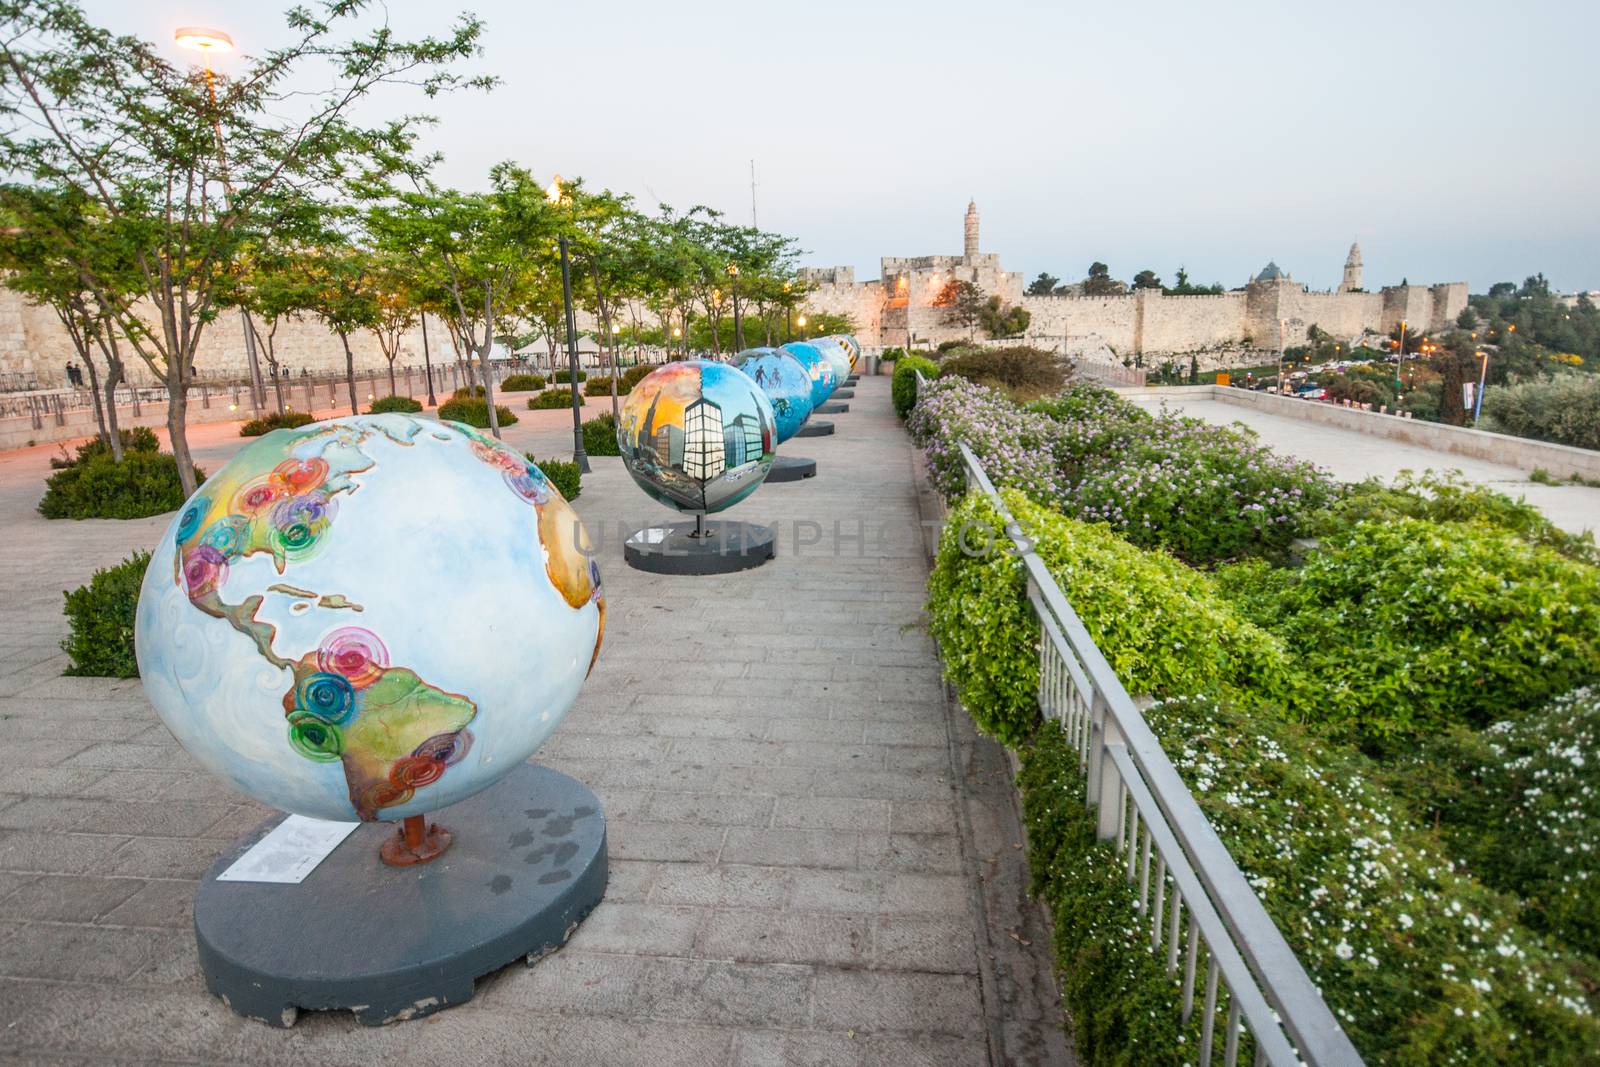 JERUSALEM - APRIL 18, 2014: An ecological display of globes, and the walls of the old city, in Jerusalem, Israel